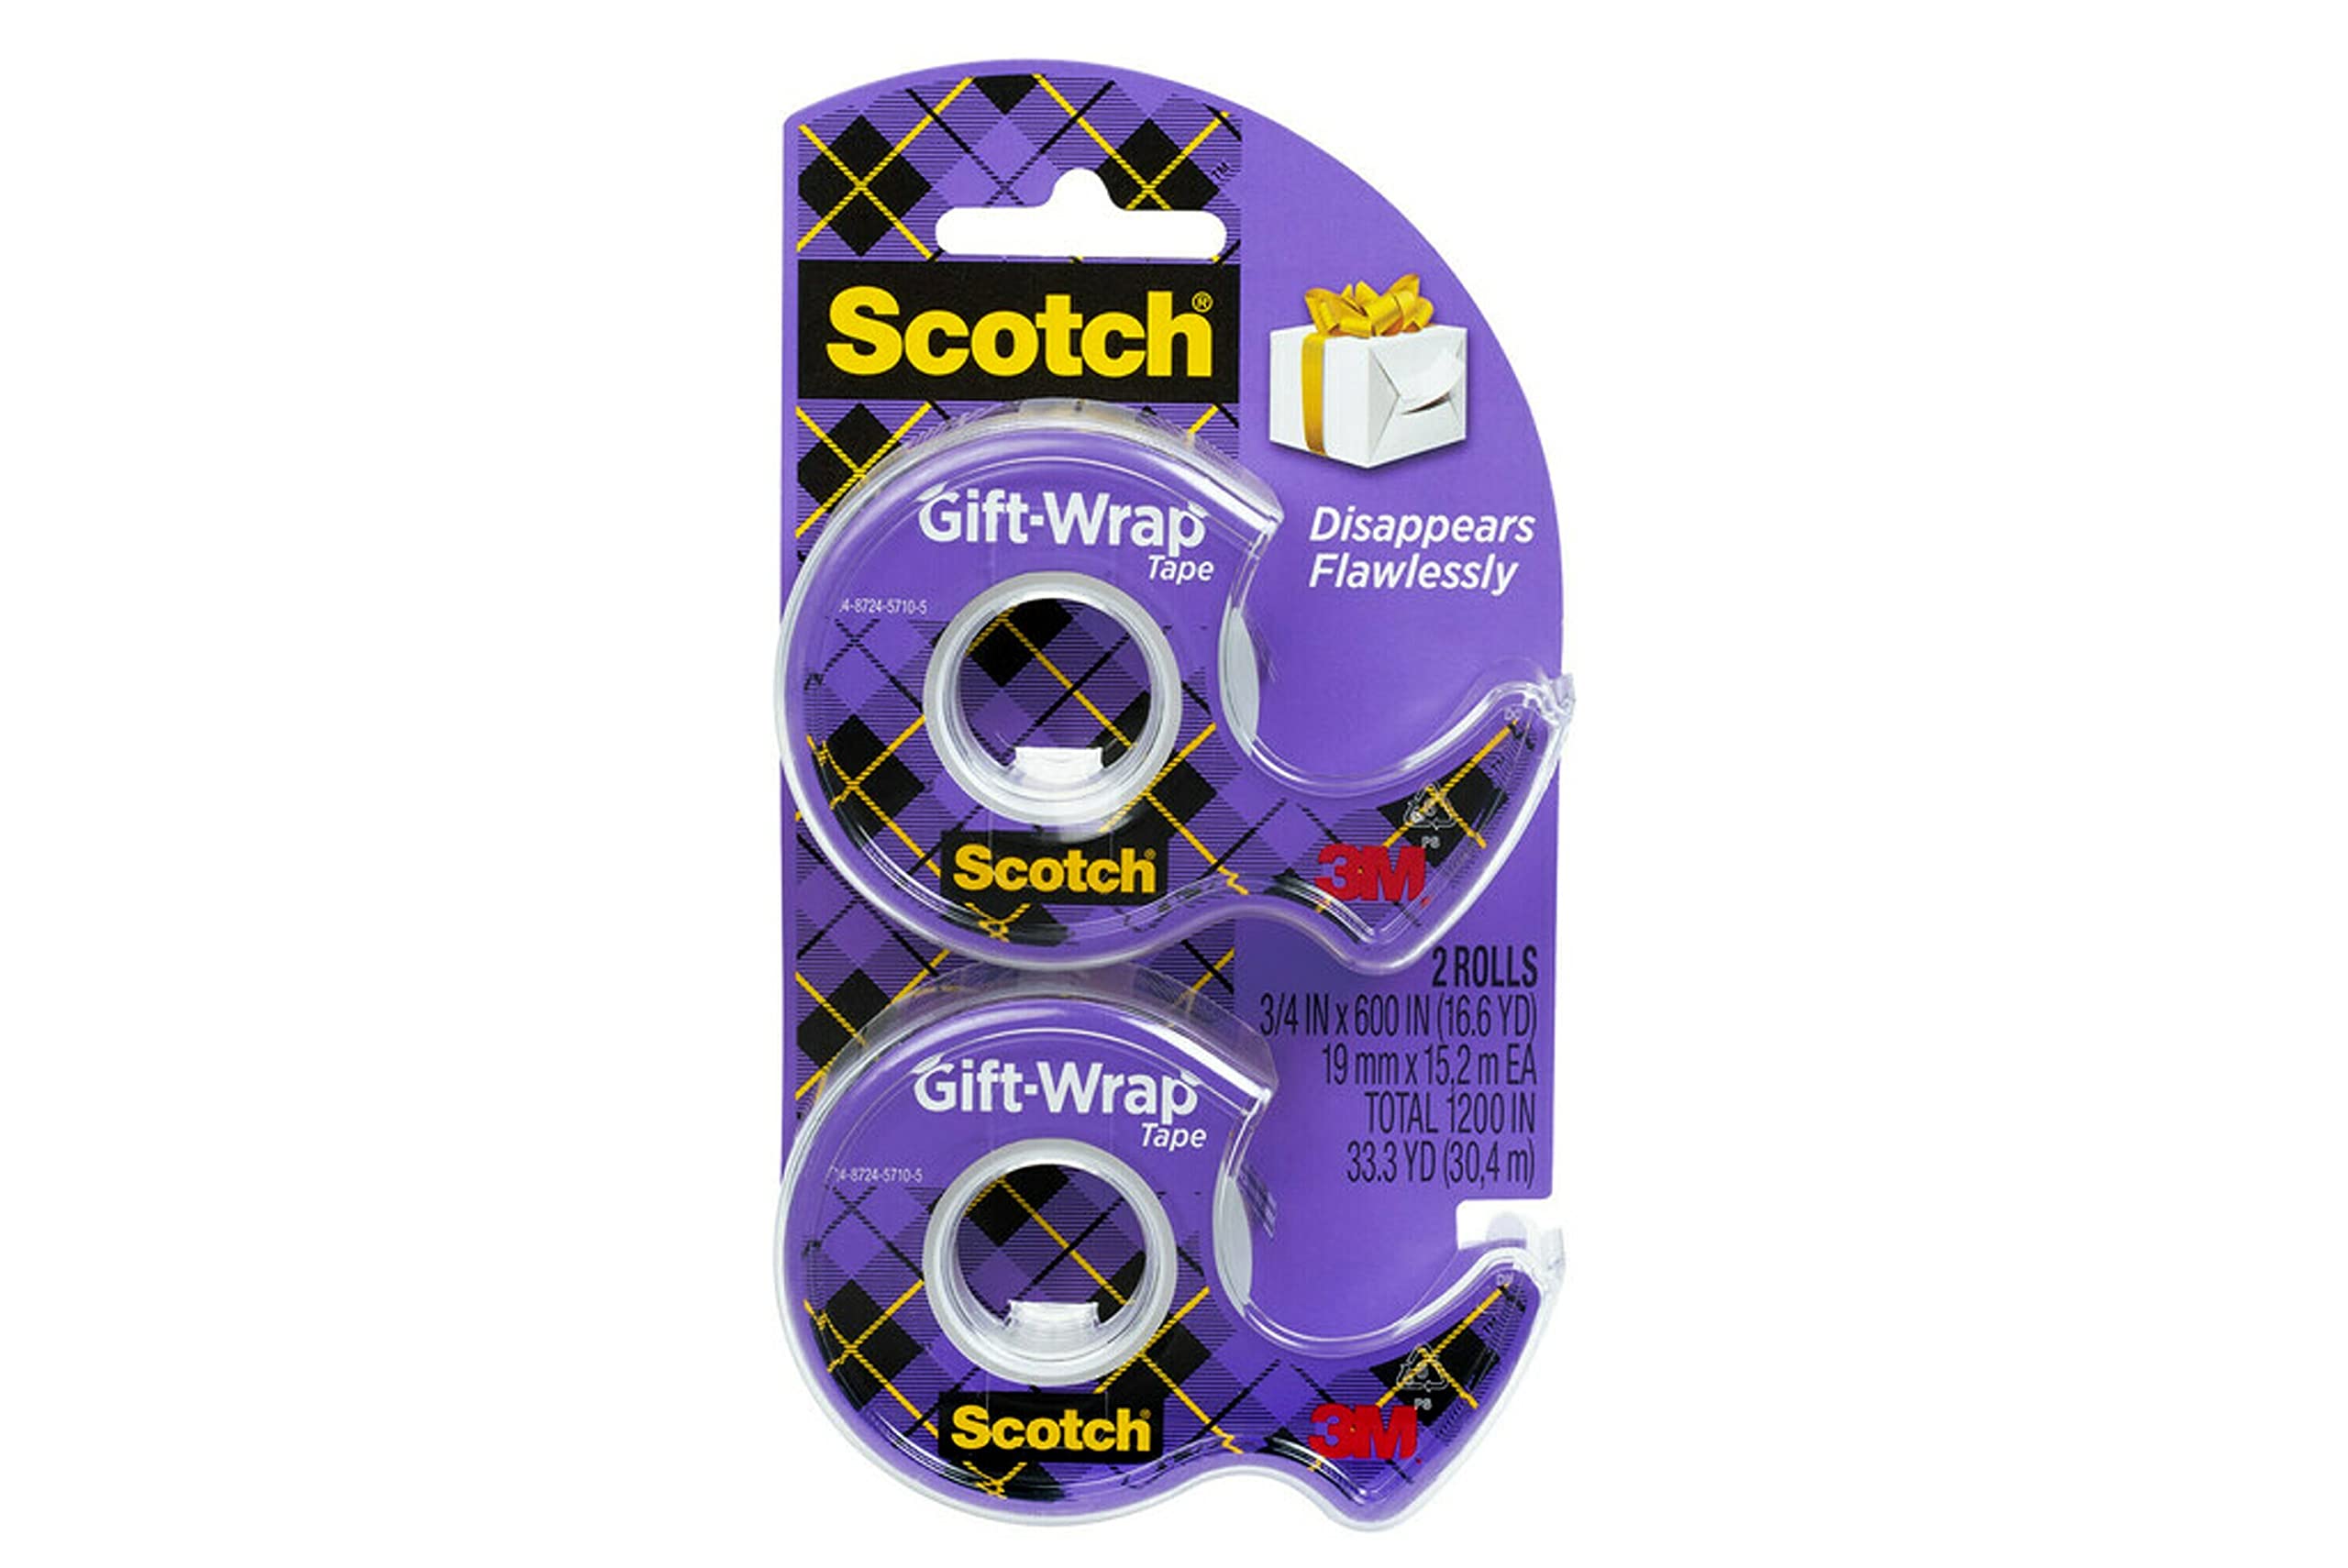 Scotch Gift Wrap Tape, Invisible, Holiday Gift Wrapping Supplies for Christmas Presents and Gift Bags, 0.75 in. x 600 in., 2 Tape Rolls With Dispensers